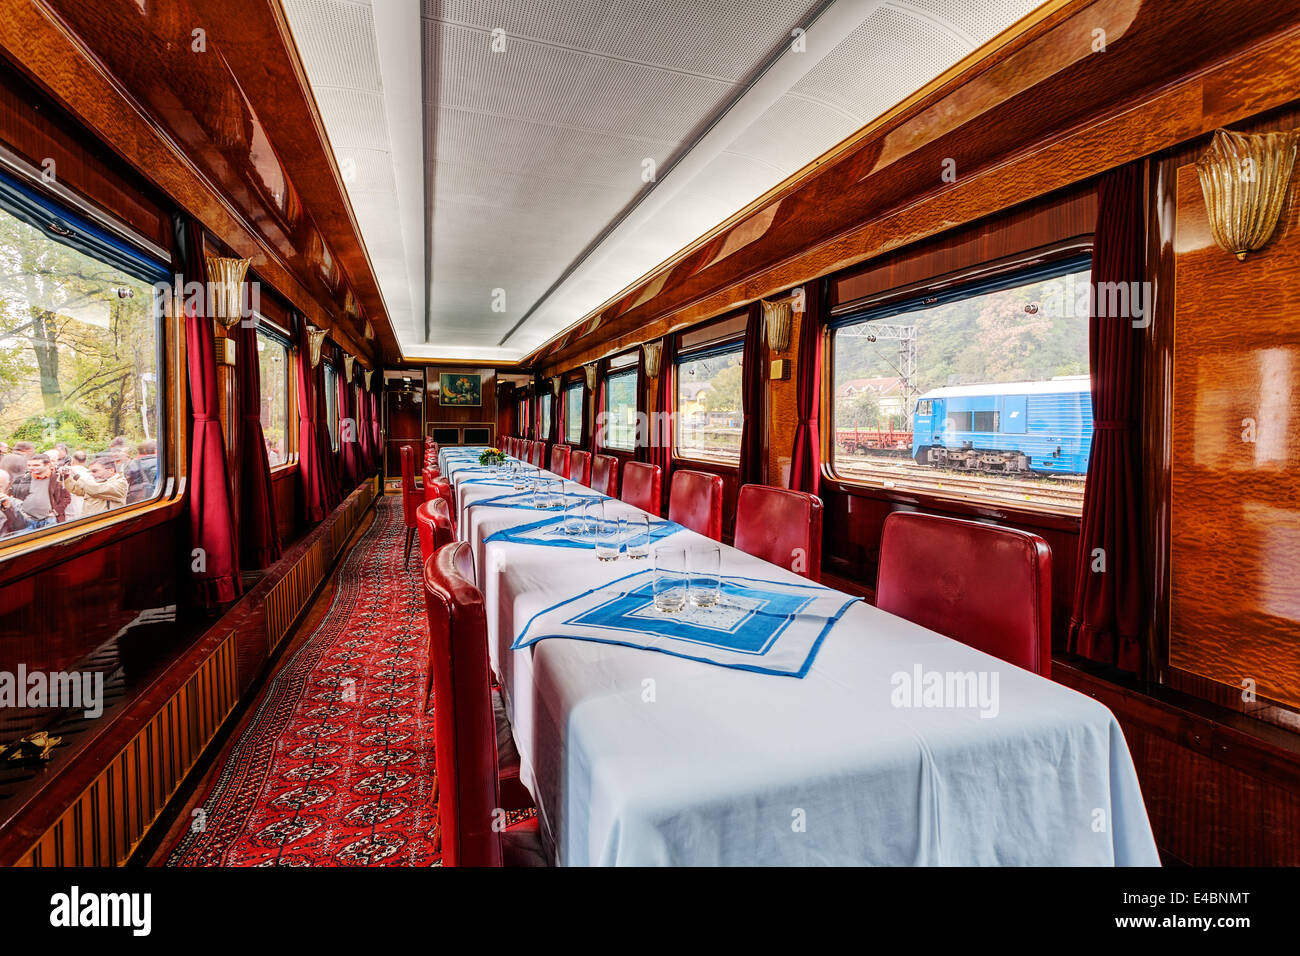 interior of luxury old train carriage Stock Photo - Alamy